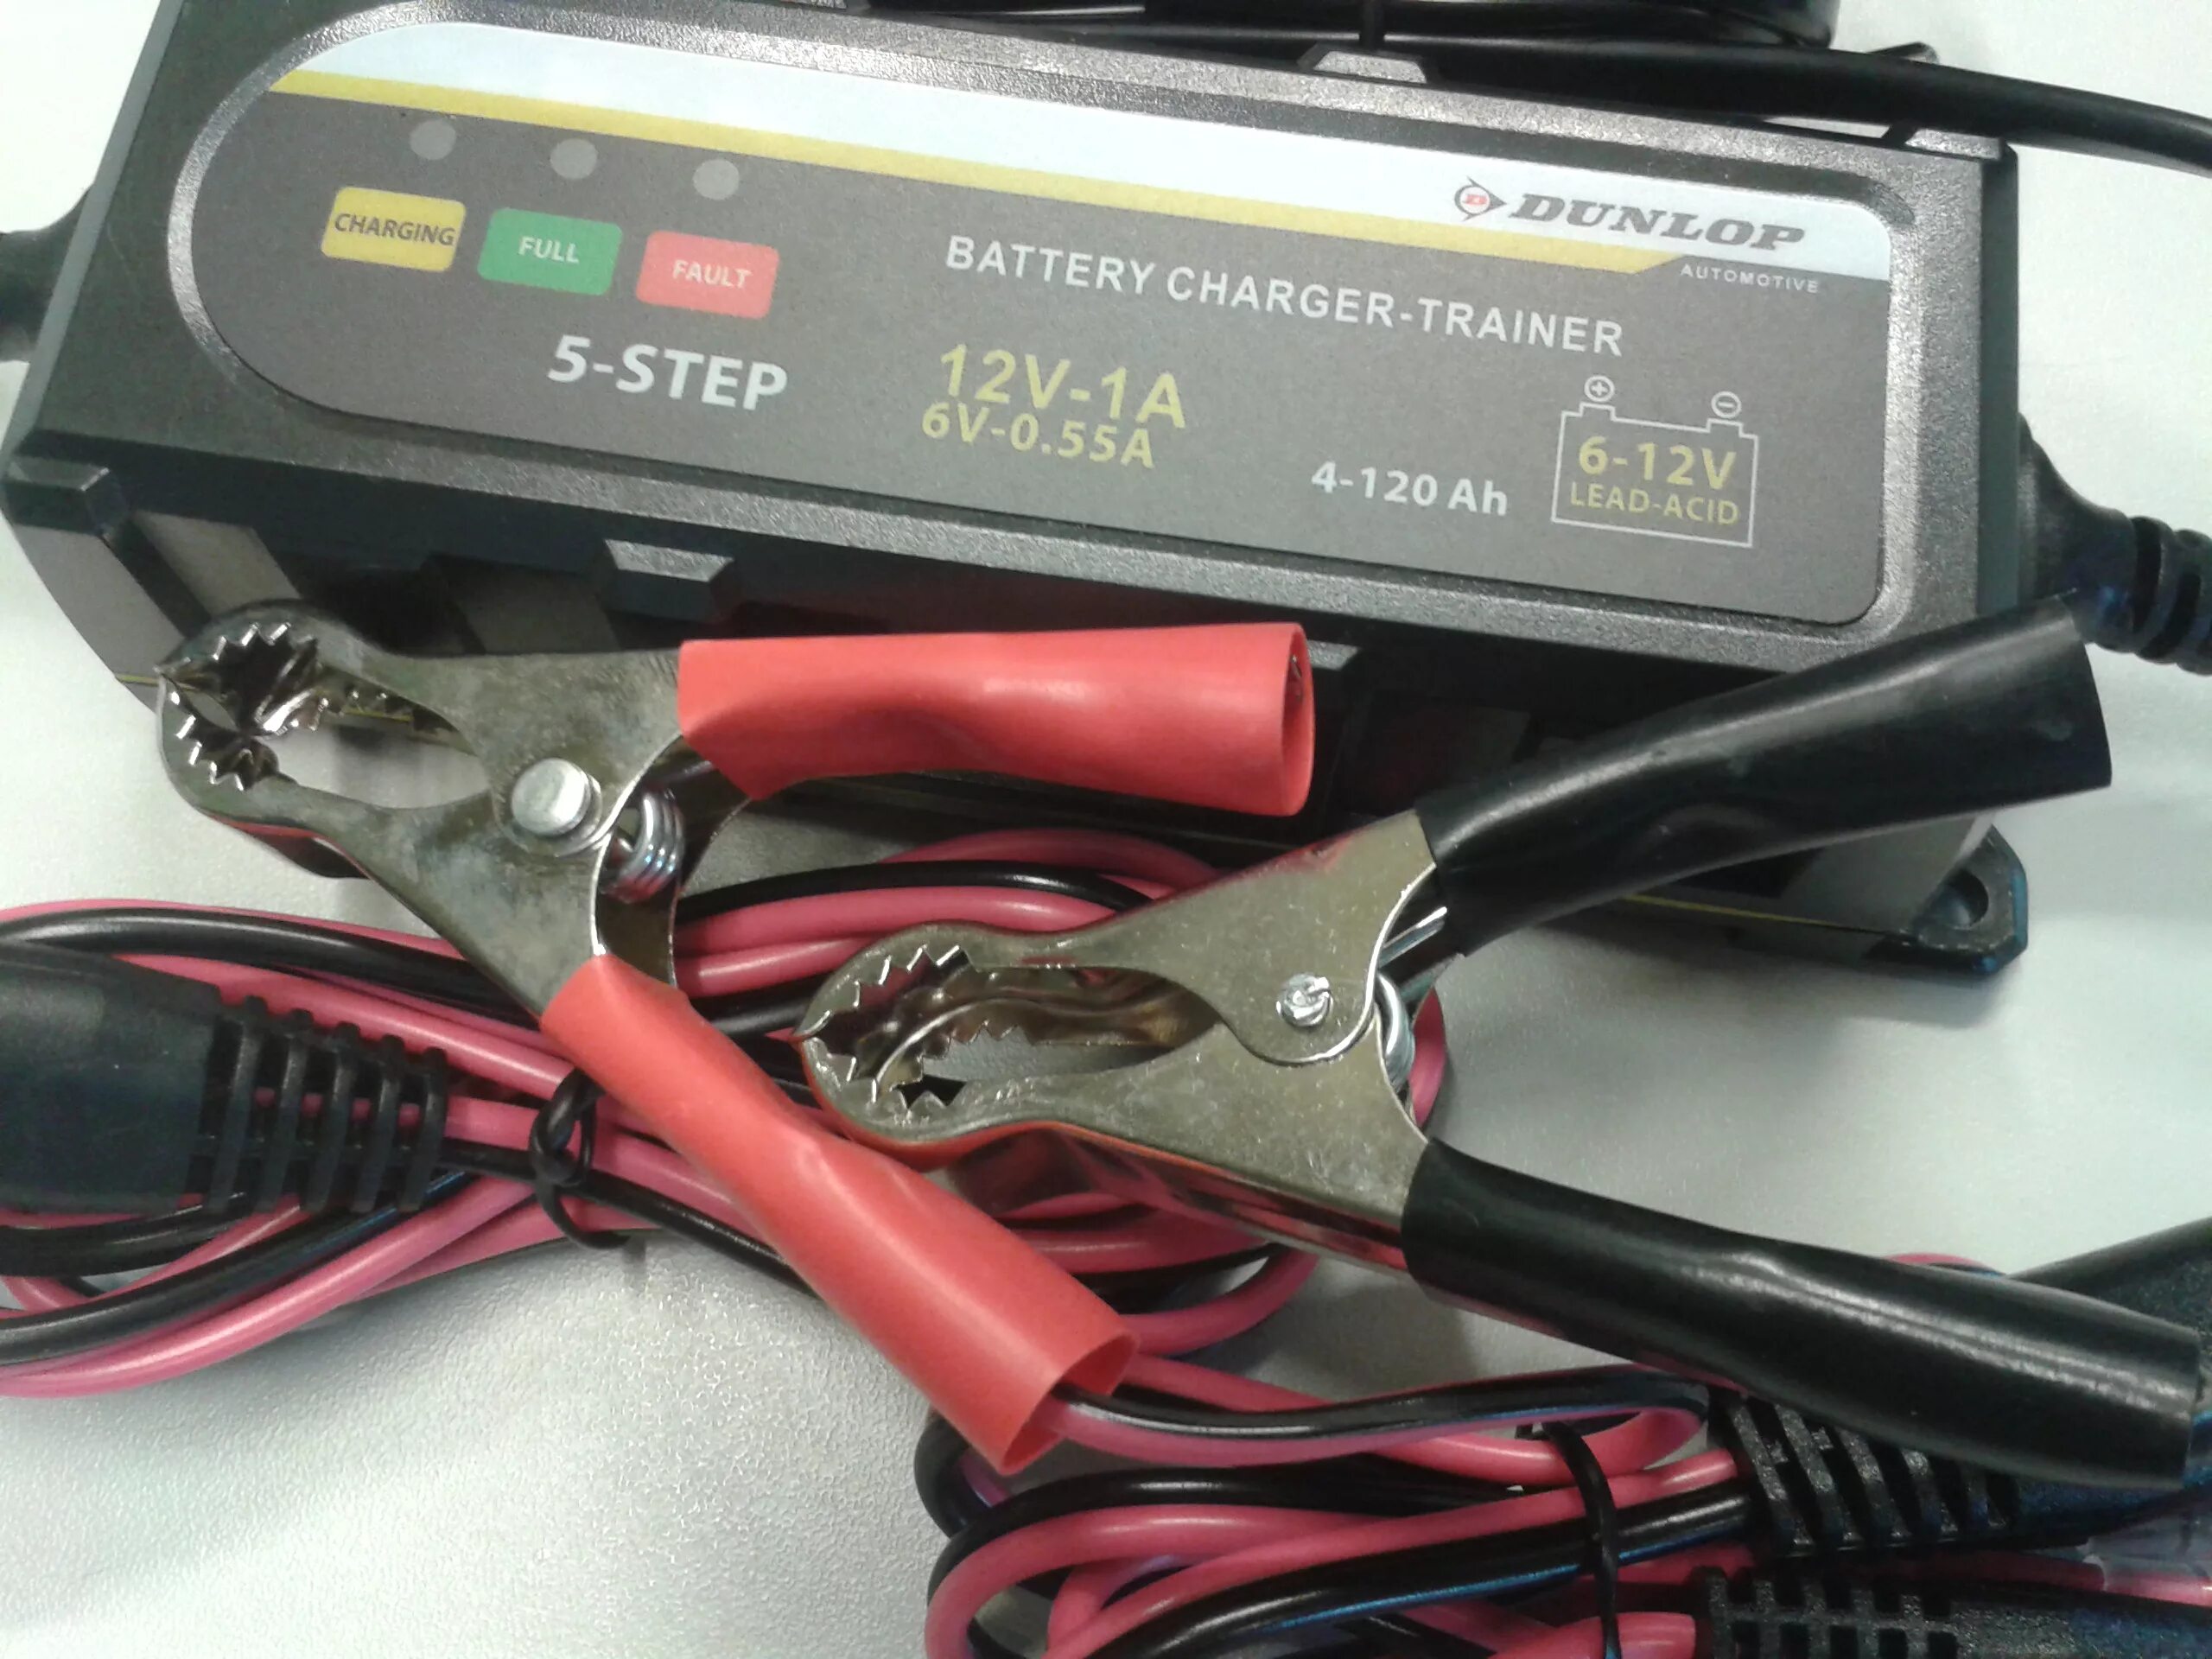 Battery fault. Hecth 2013 car Battery Charger. Battery Charger h-10cdm. Europower Battery Charger. Battery Charger sec-1225e.